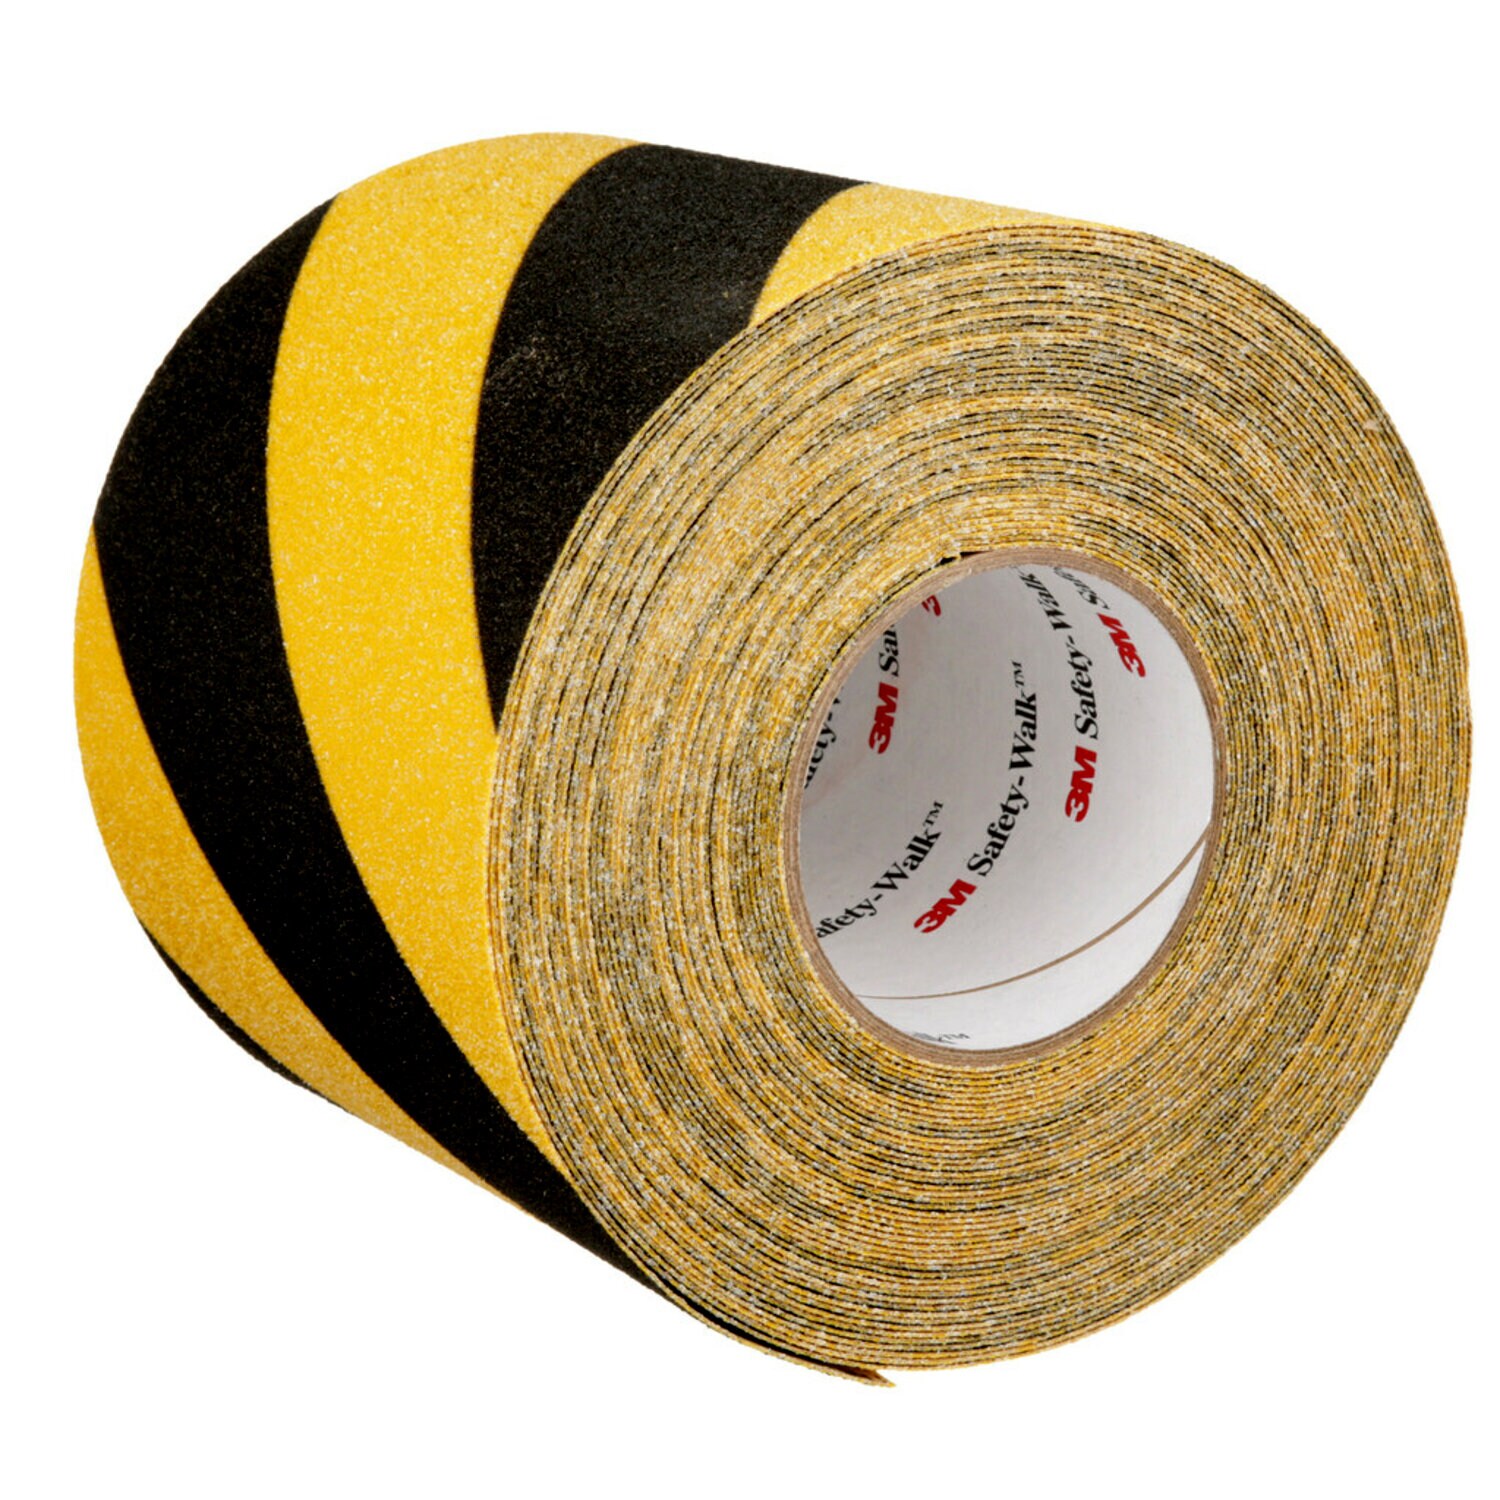 7100134978 - 3M Safety-Walk Slip-Resistant General Purpose Tapes & Treads 613,
Black/Yellow Stripe, 6 in x 60 ft, Roll, 1/Case